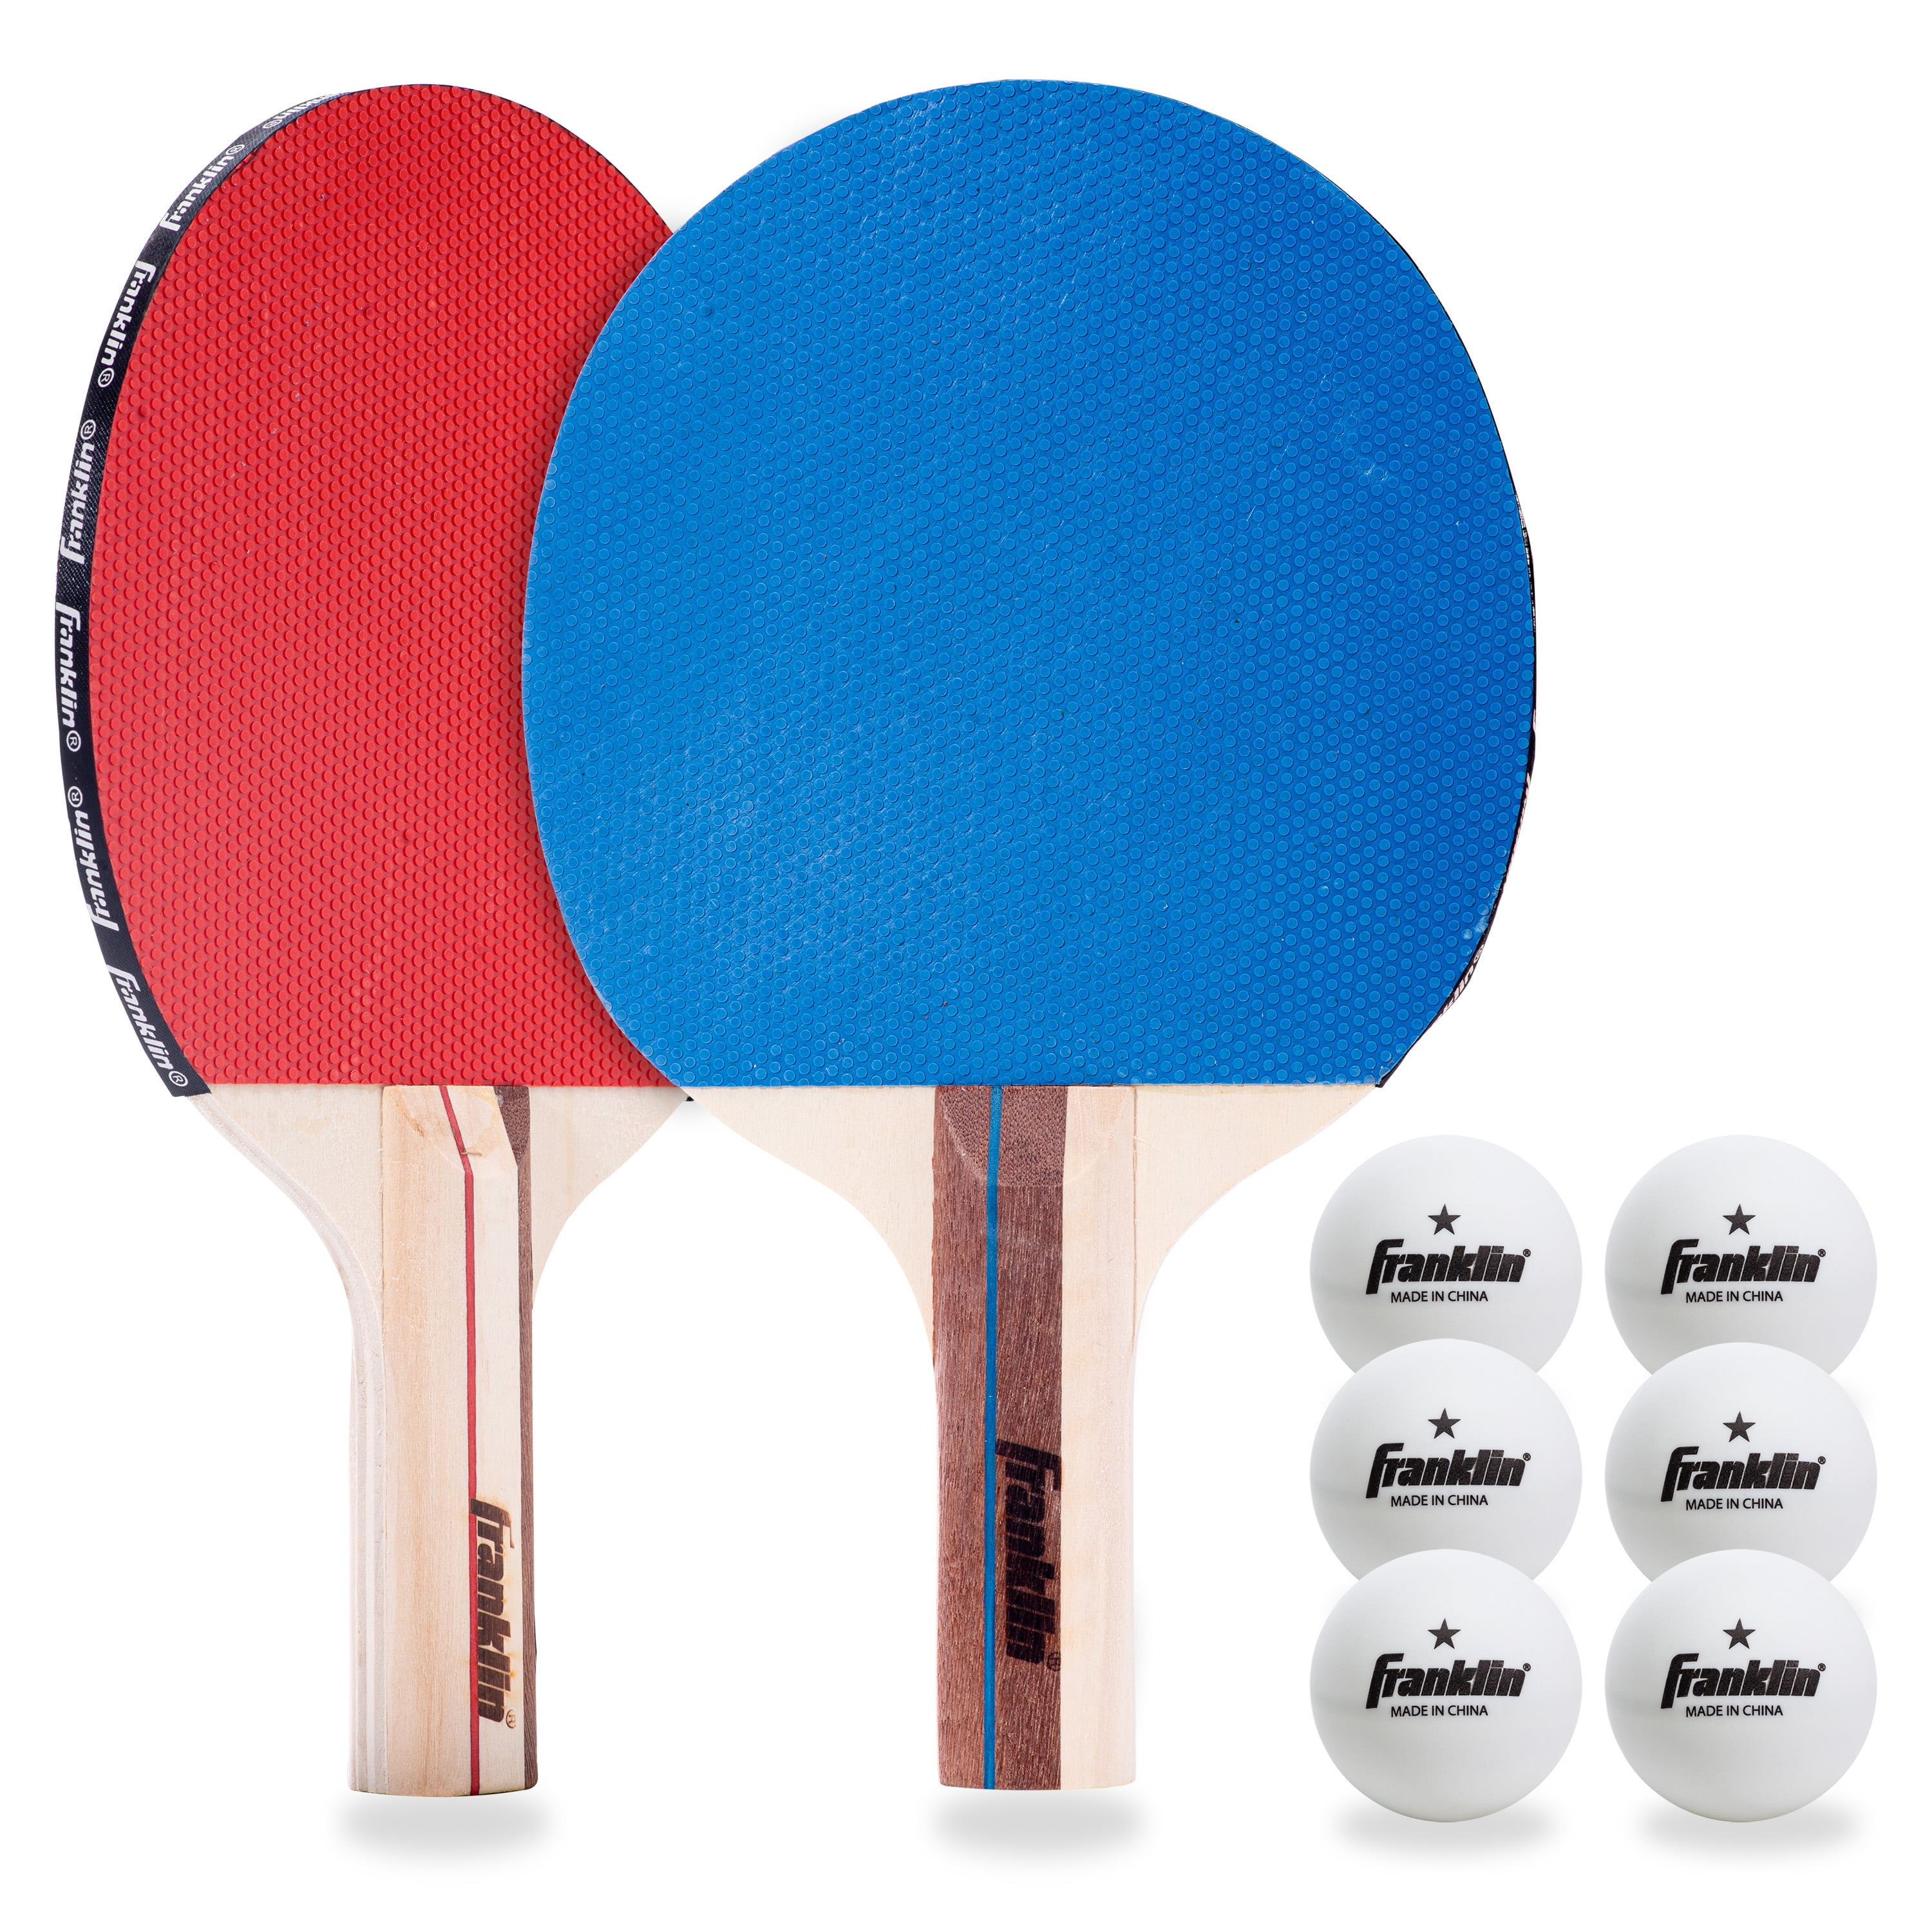 Table Tennis Racquets Fun Table Tennis Set with Ping Pong Paddles and Balls Table Tennis Paddles PONG TIMES Ping Pong Paddles Set of 4 Ping Pong Rackets with 5 Star Balls Portable Ping Pong Set 